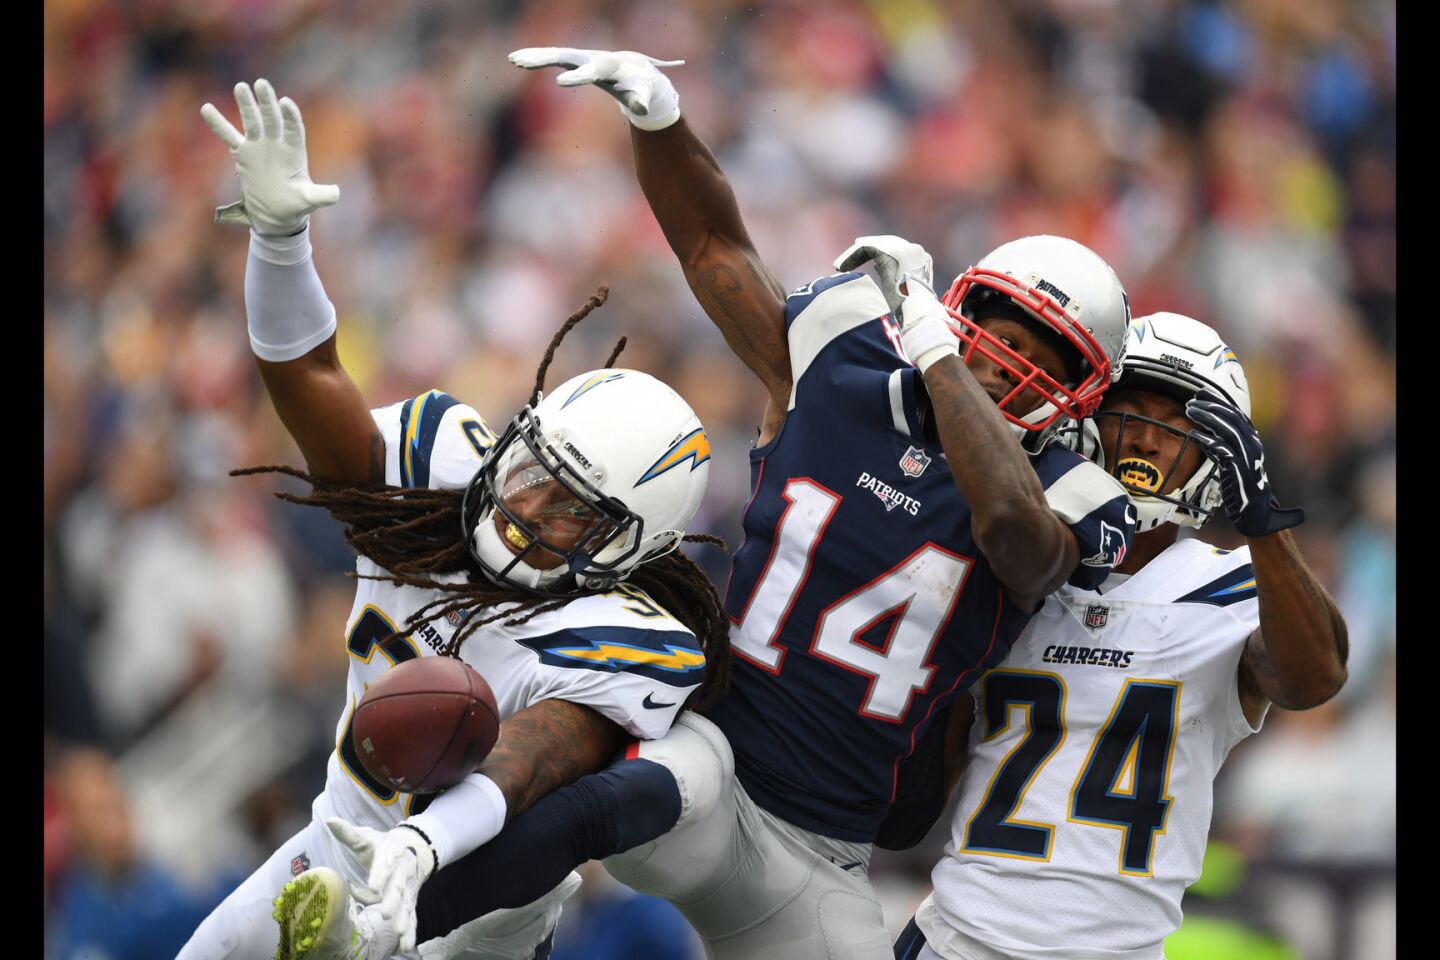 Chargers free safety Tre Boston, left, and cornerback Trevor Williams, right, break up a reception attempt by New England Patriots wide receiver Brandin Cooks during the first half.